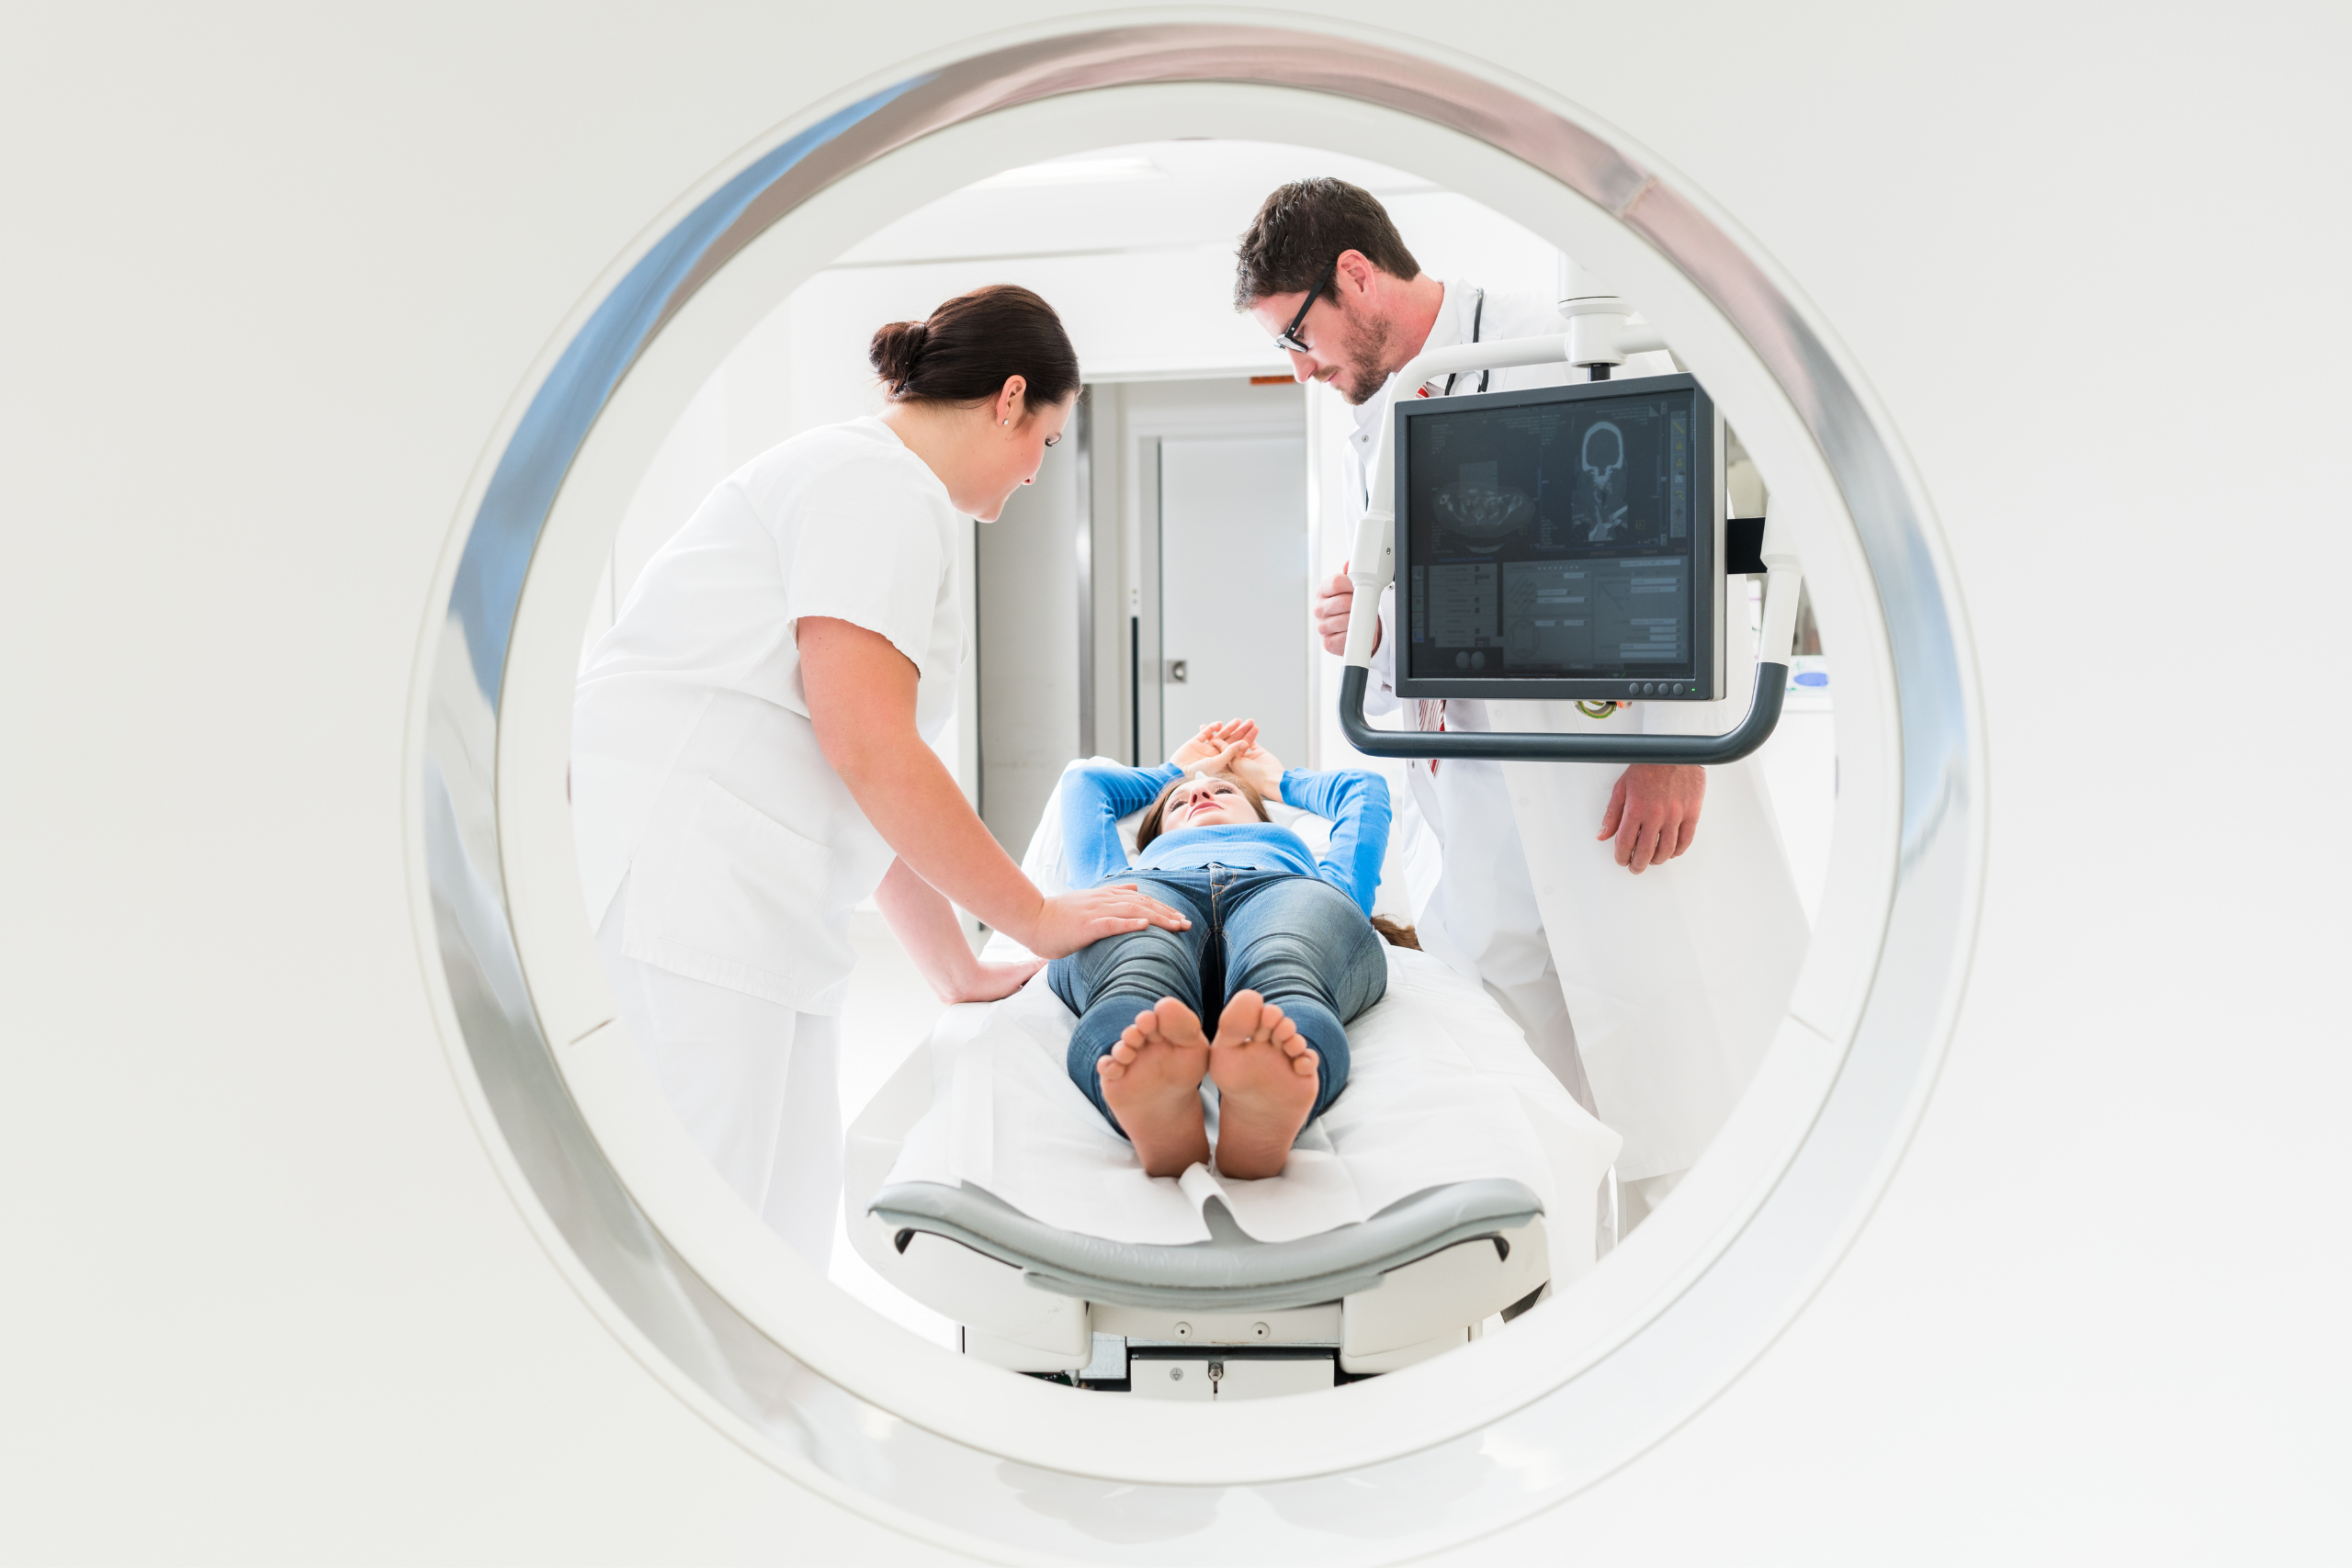 The Key Differences Between a CT Scan and MRI